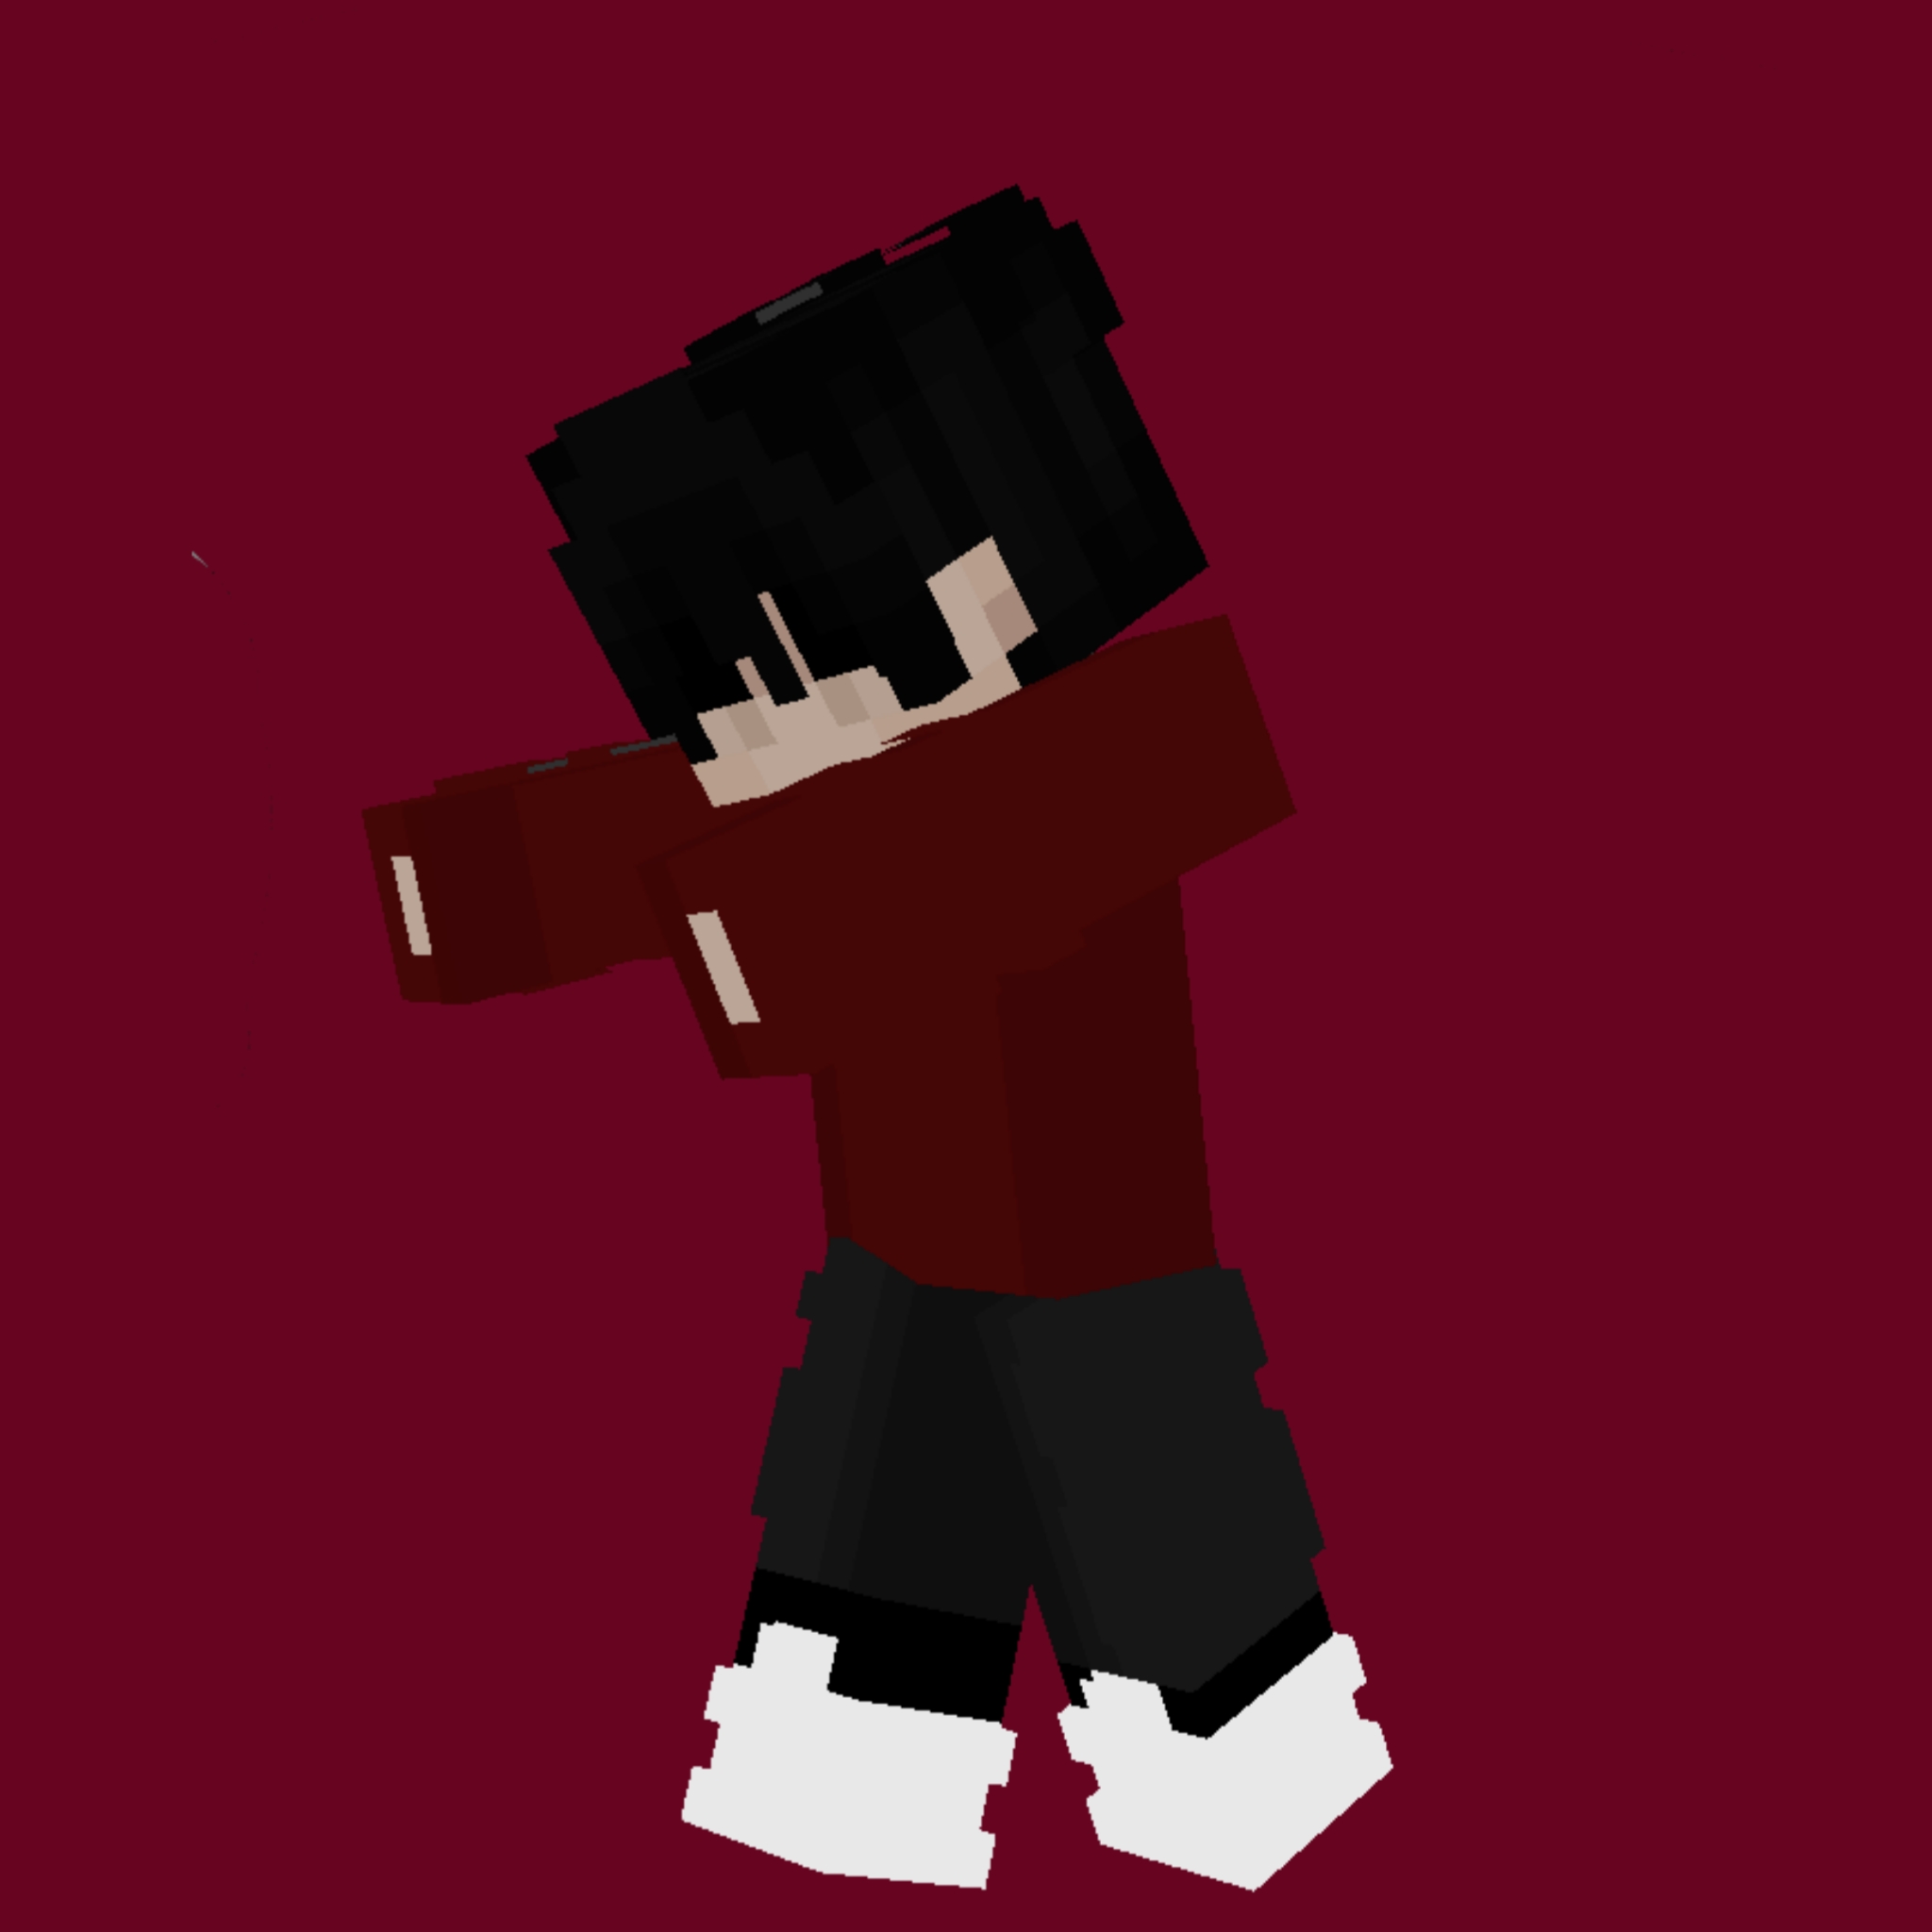 abd4x's Profile Picture on PvPRP